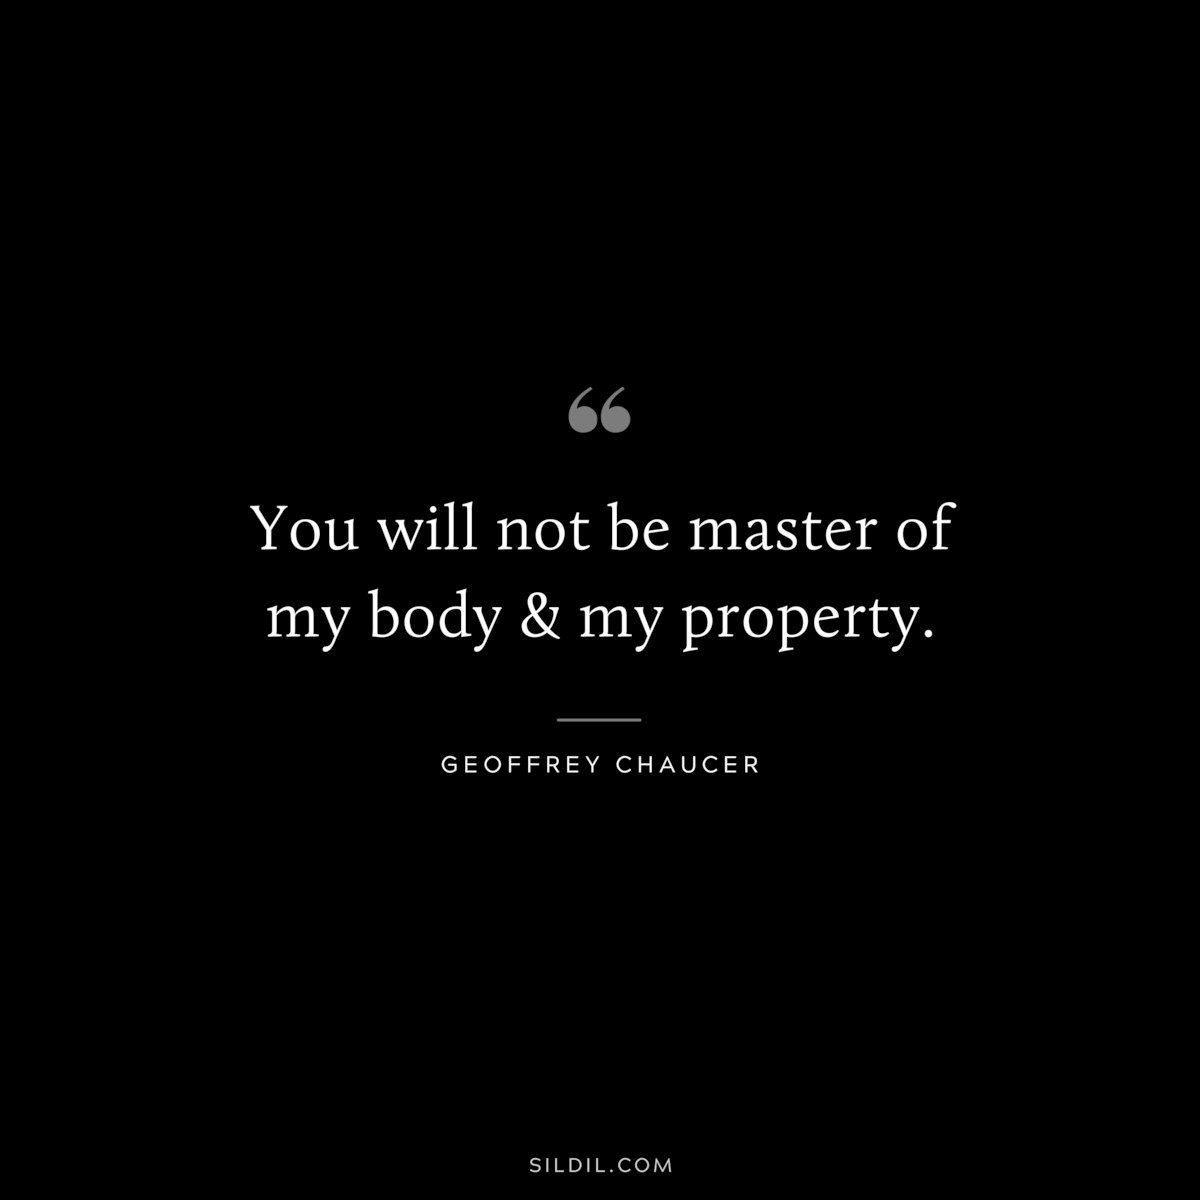 You will not be master of my body & my property. ― Geoffrey Chaucer